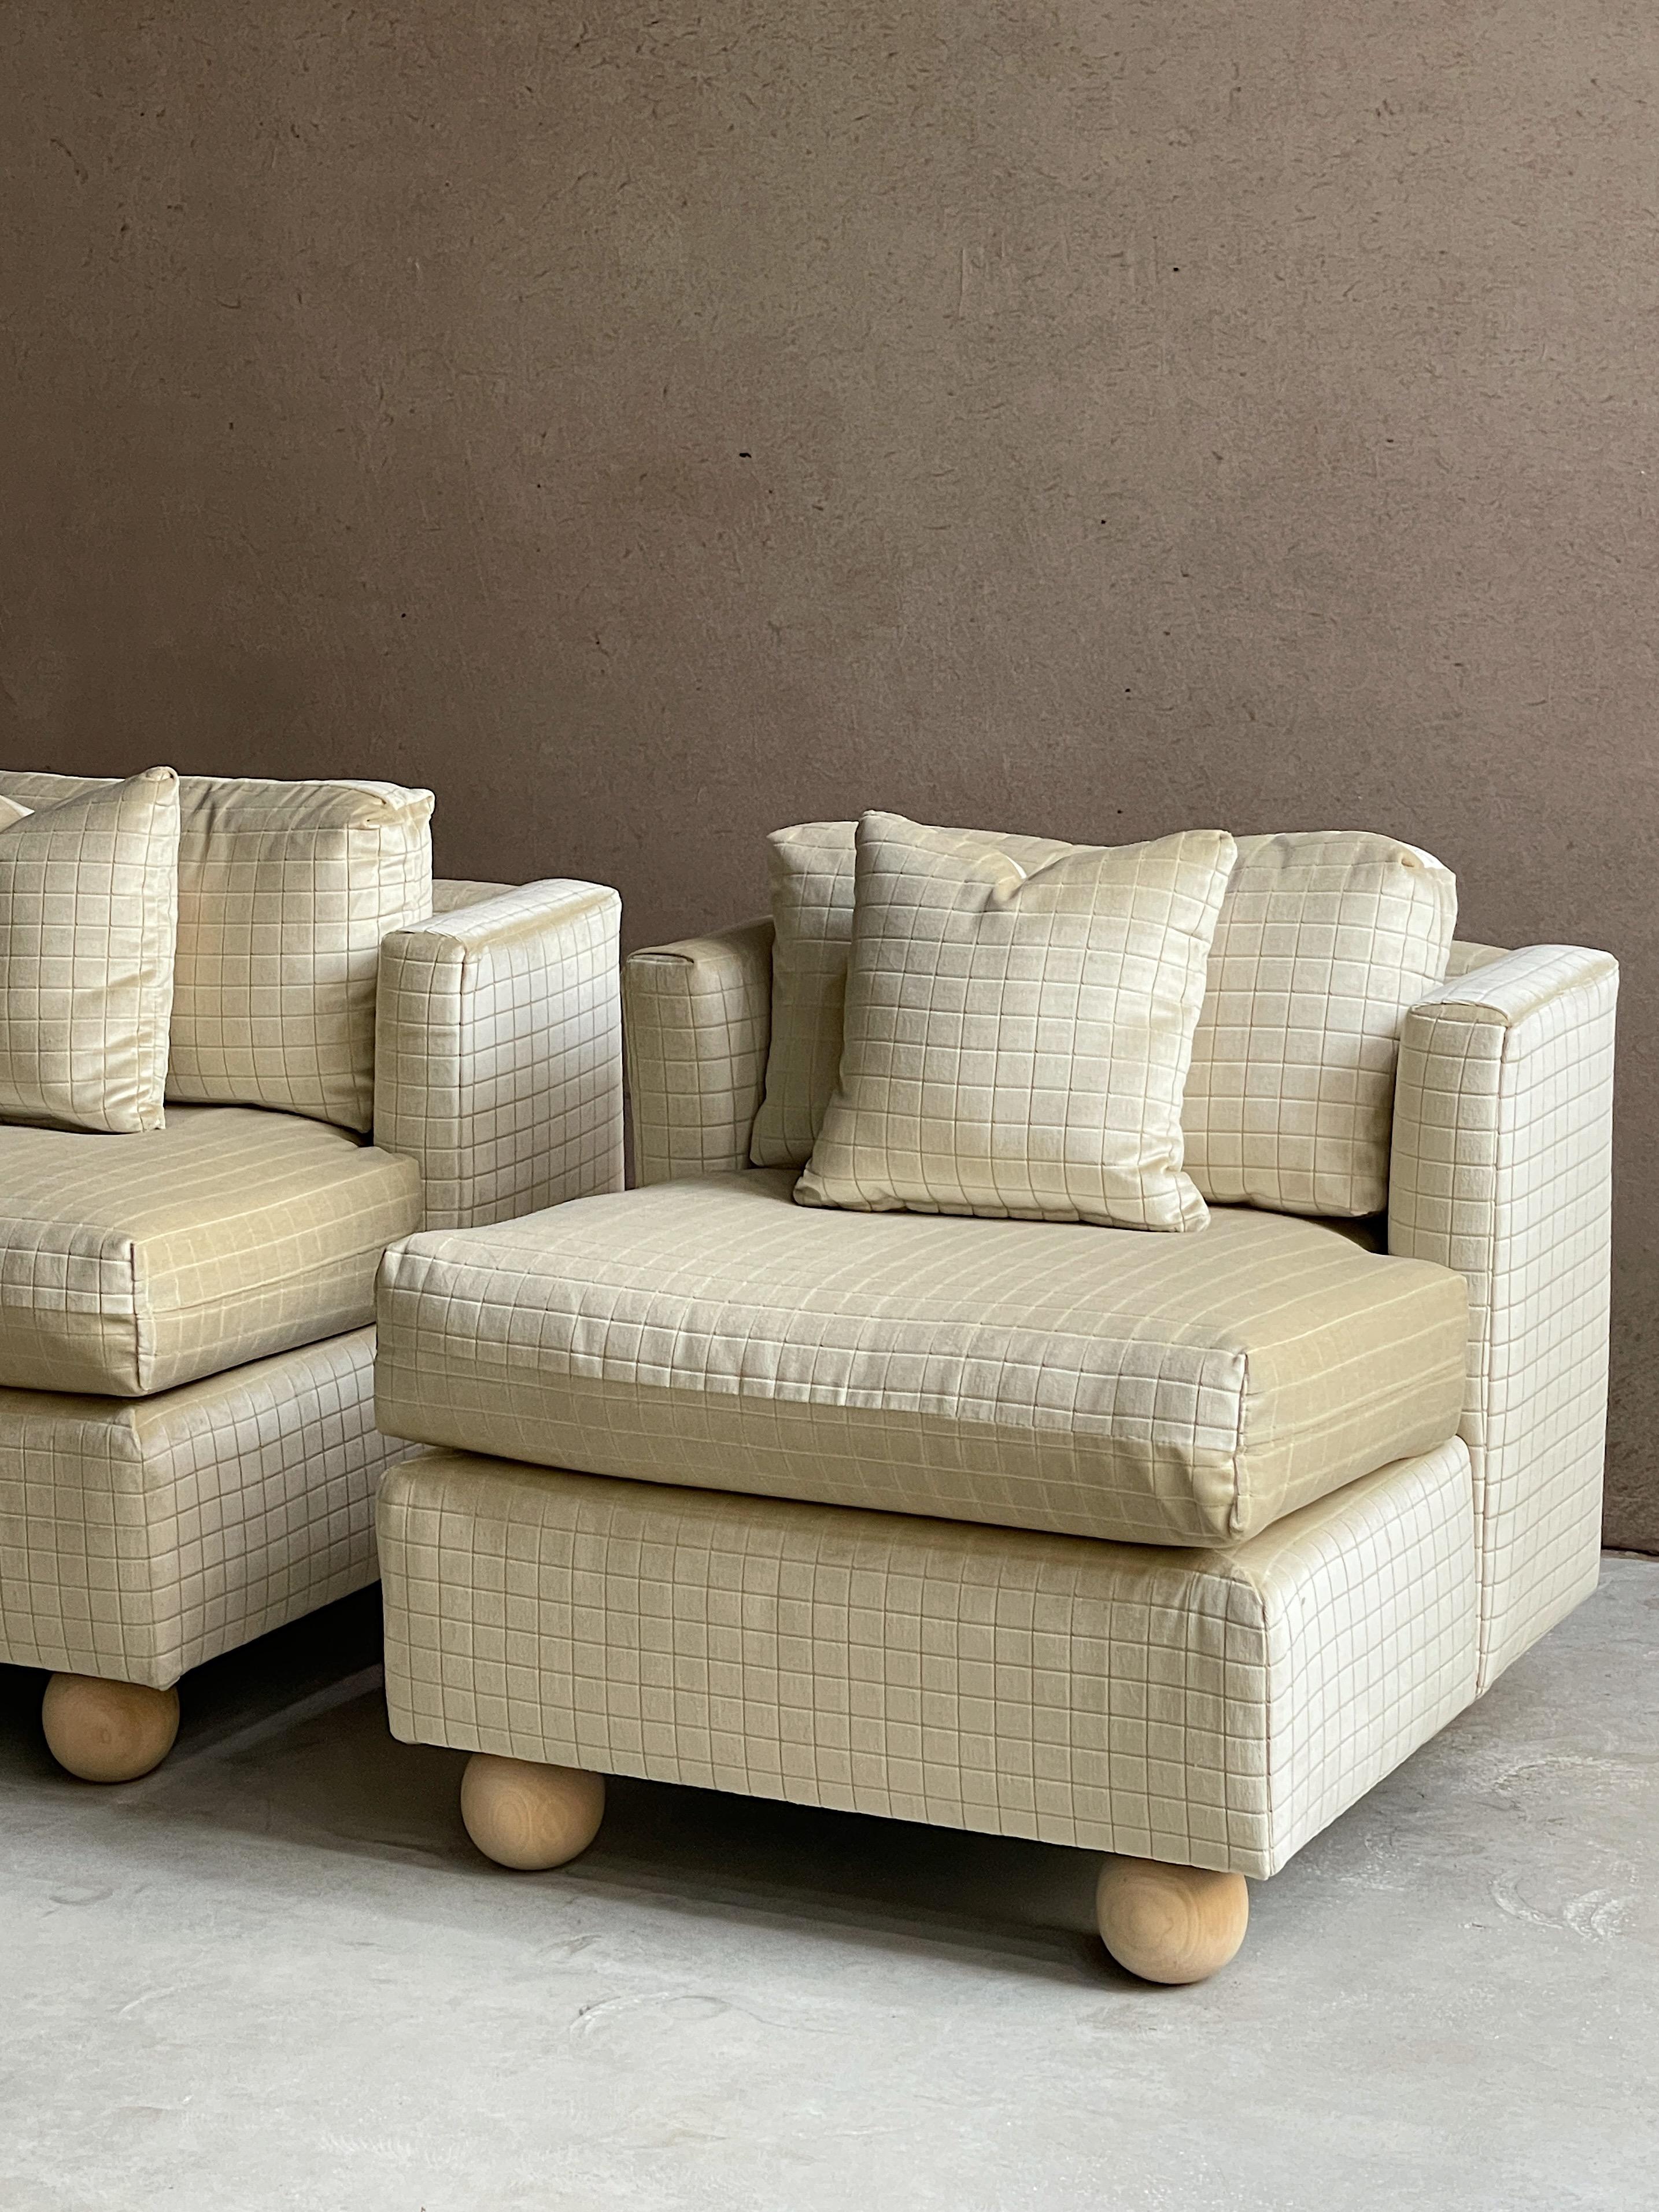 1960s chair recently upholstered in cream tiled mohair. We've updated the feet with a dramatic 5